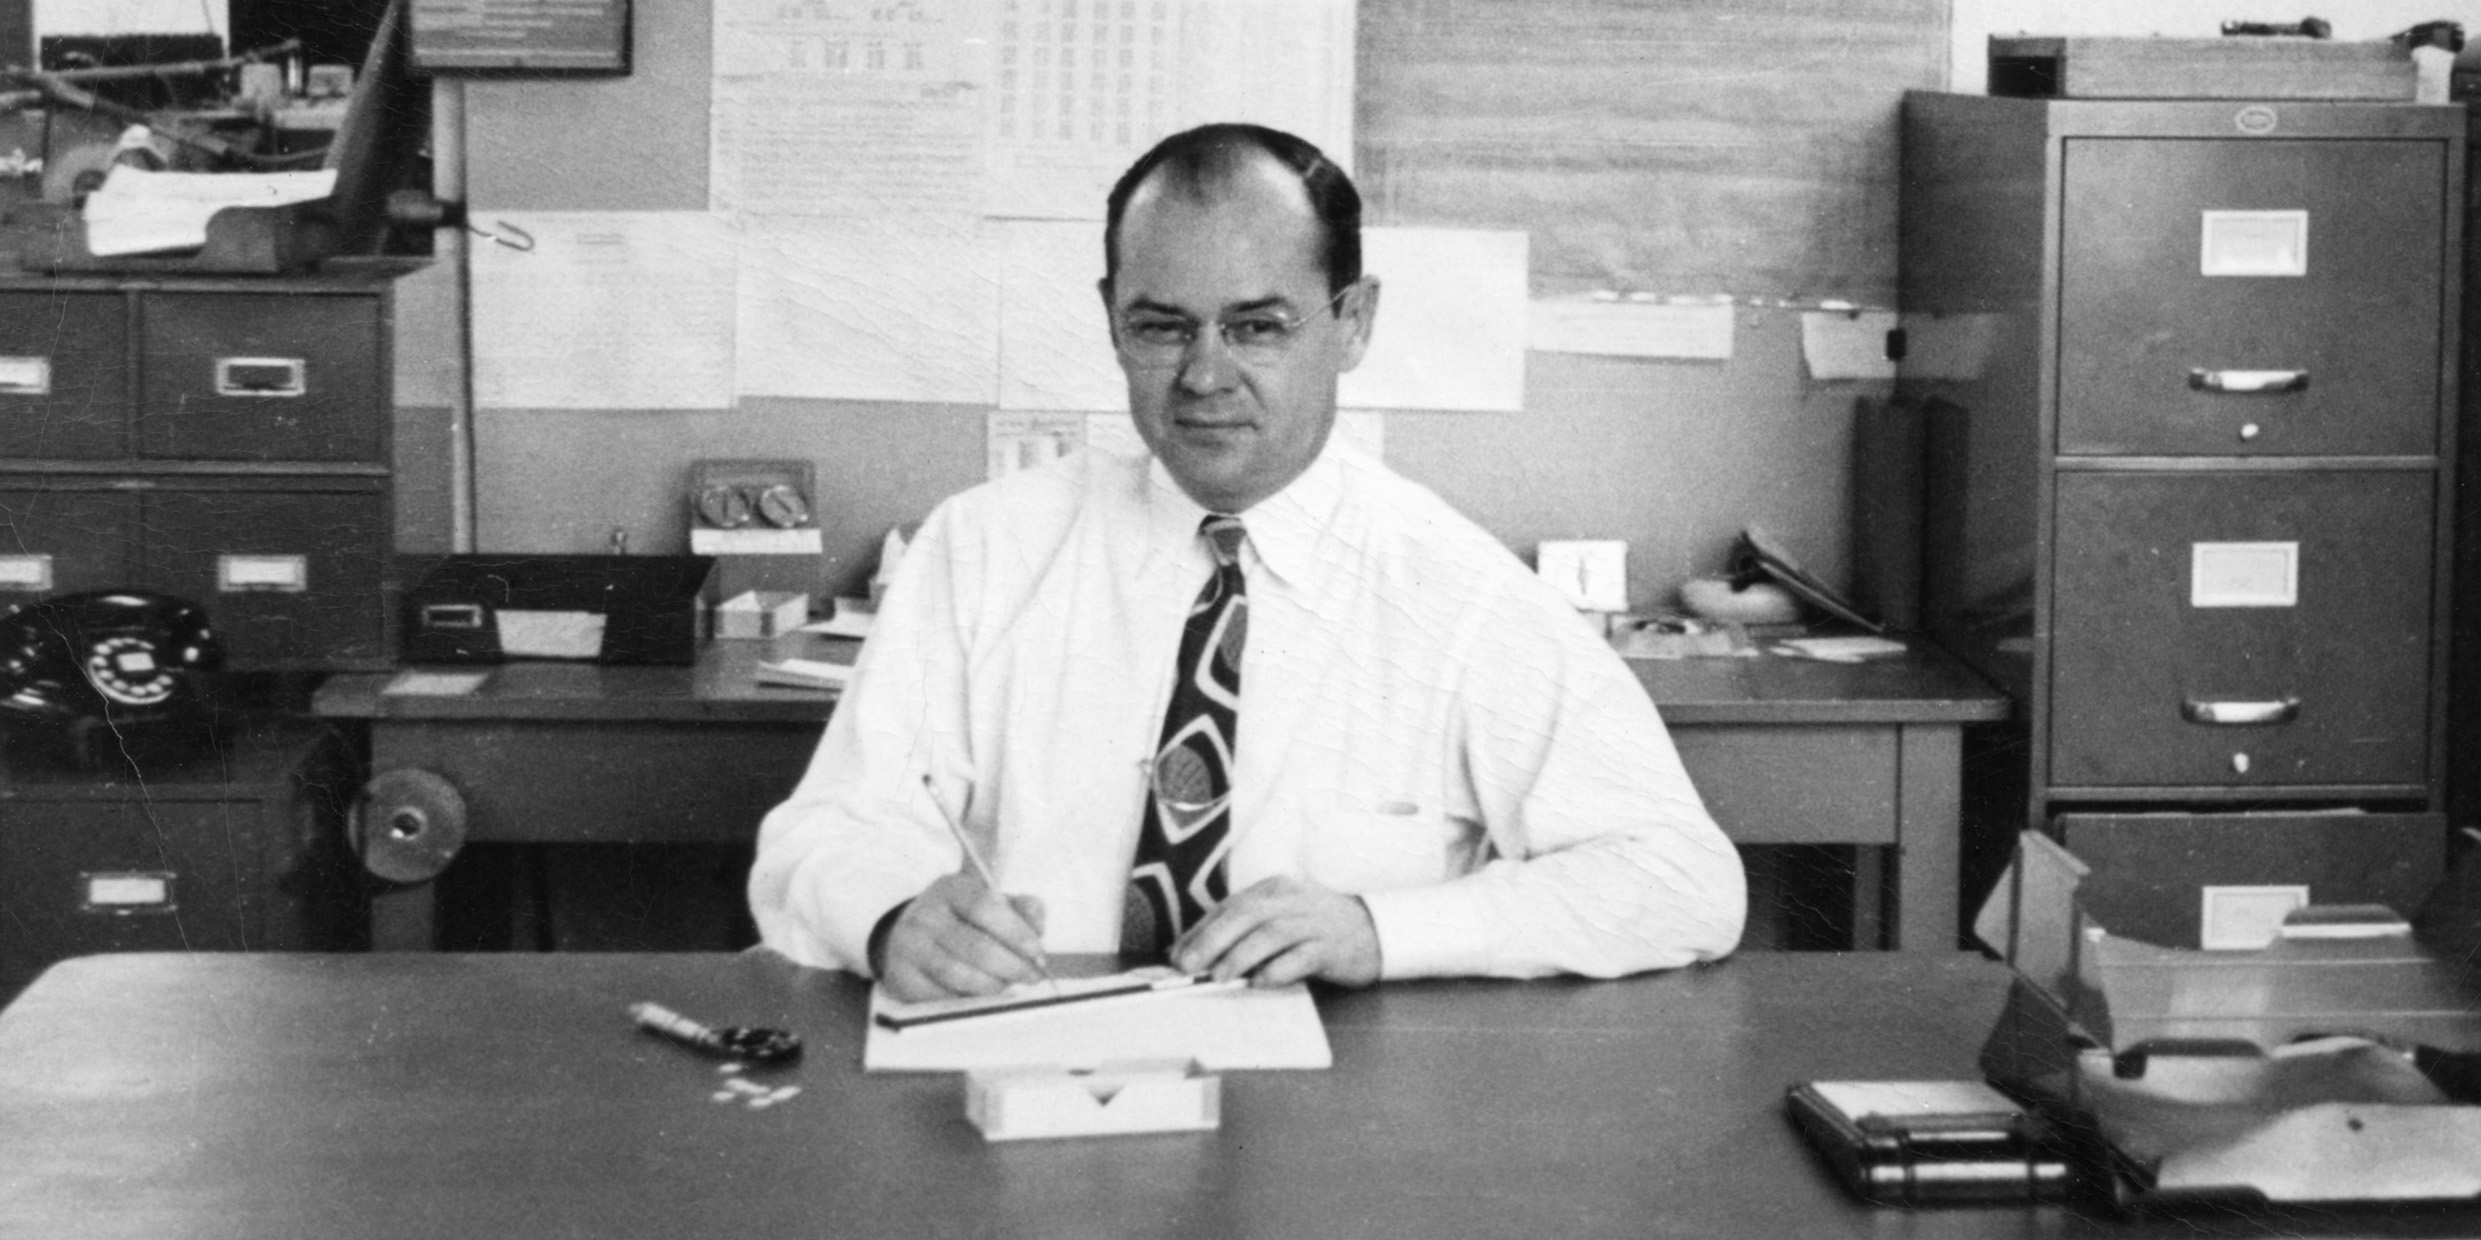 Black and white photo of a man in shirt and tie at a desk with pencil and slide rule